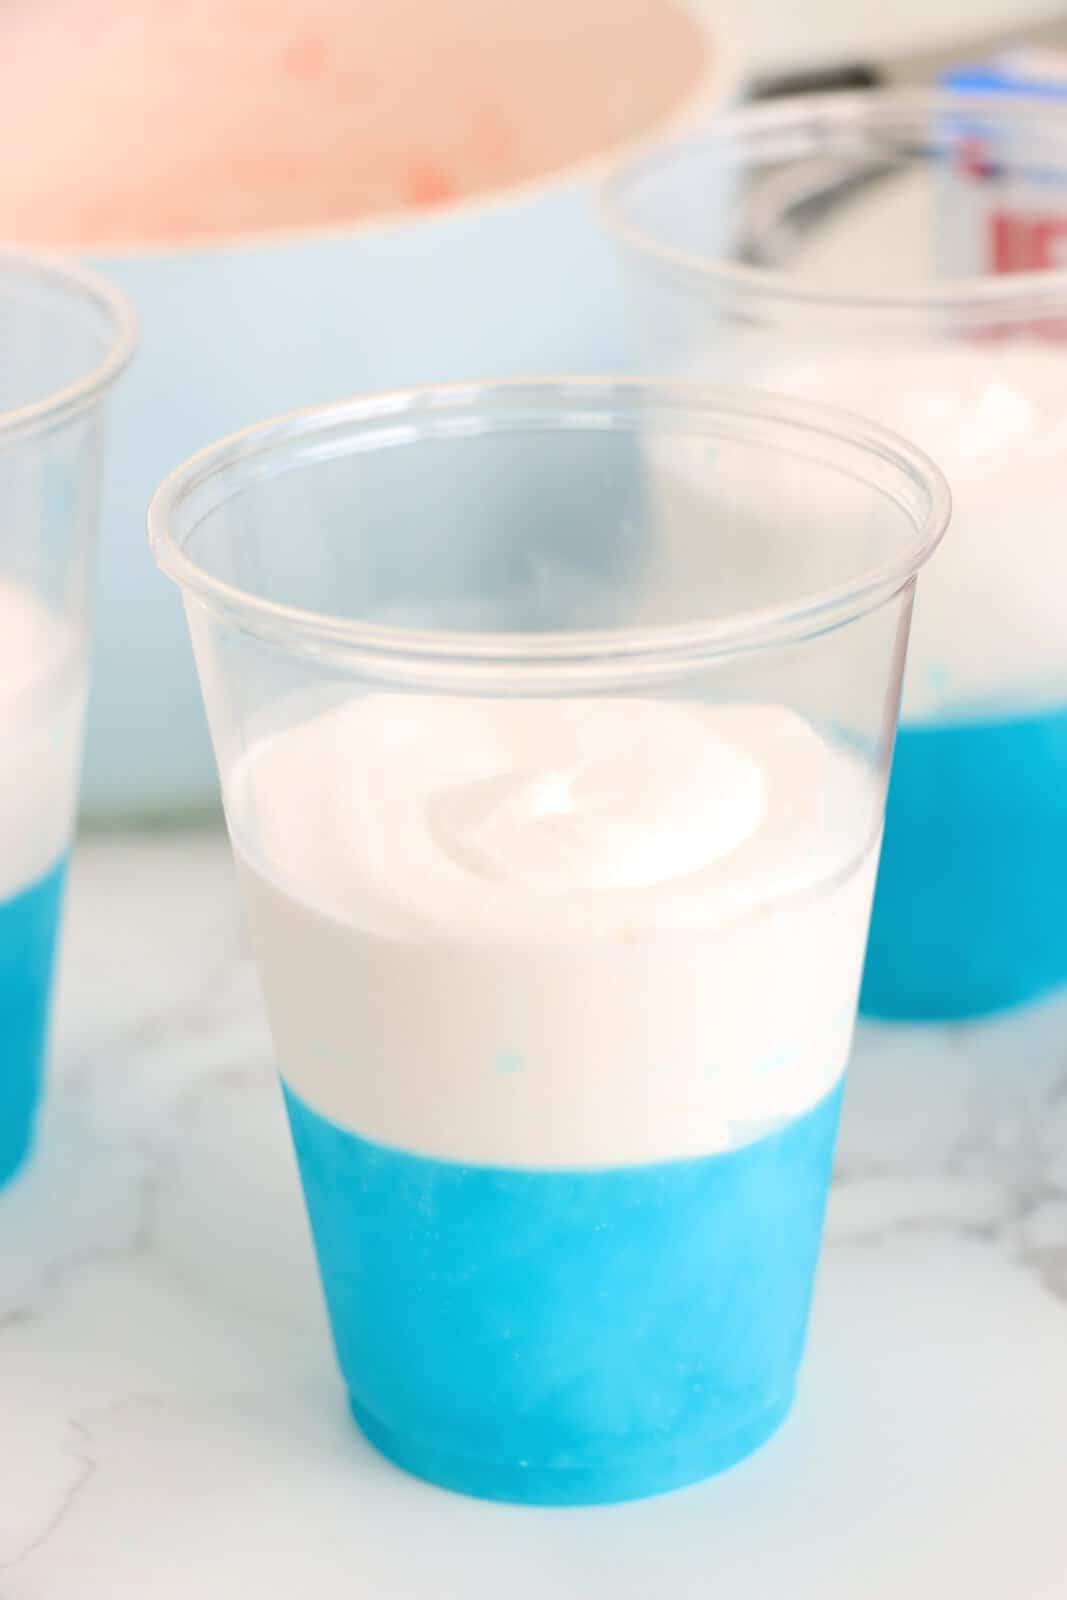 Berry Blue Jello layer and a whipped cream layer on top in a cup.